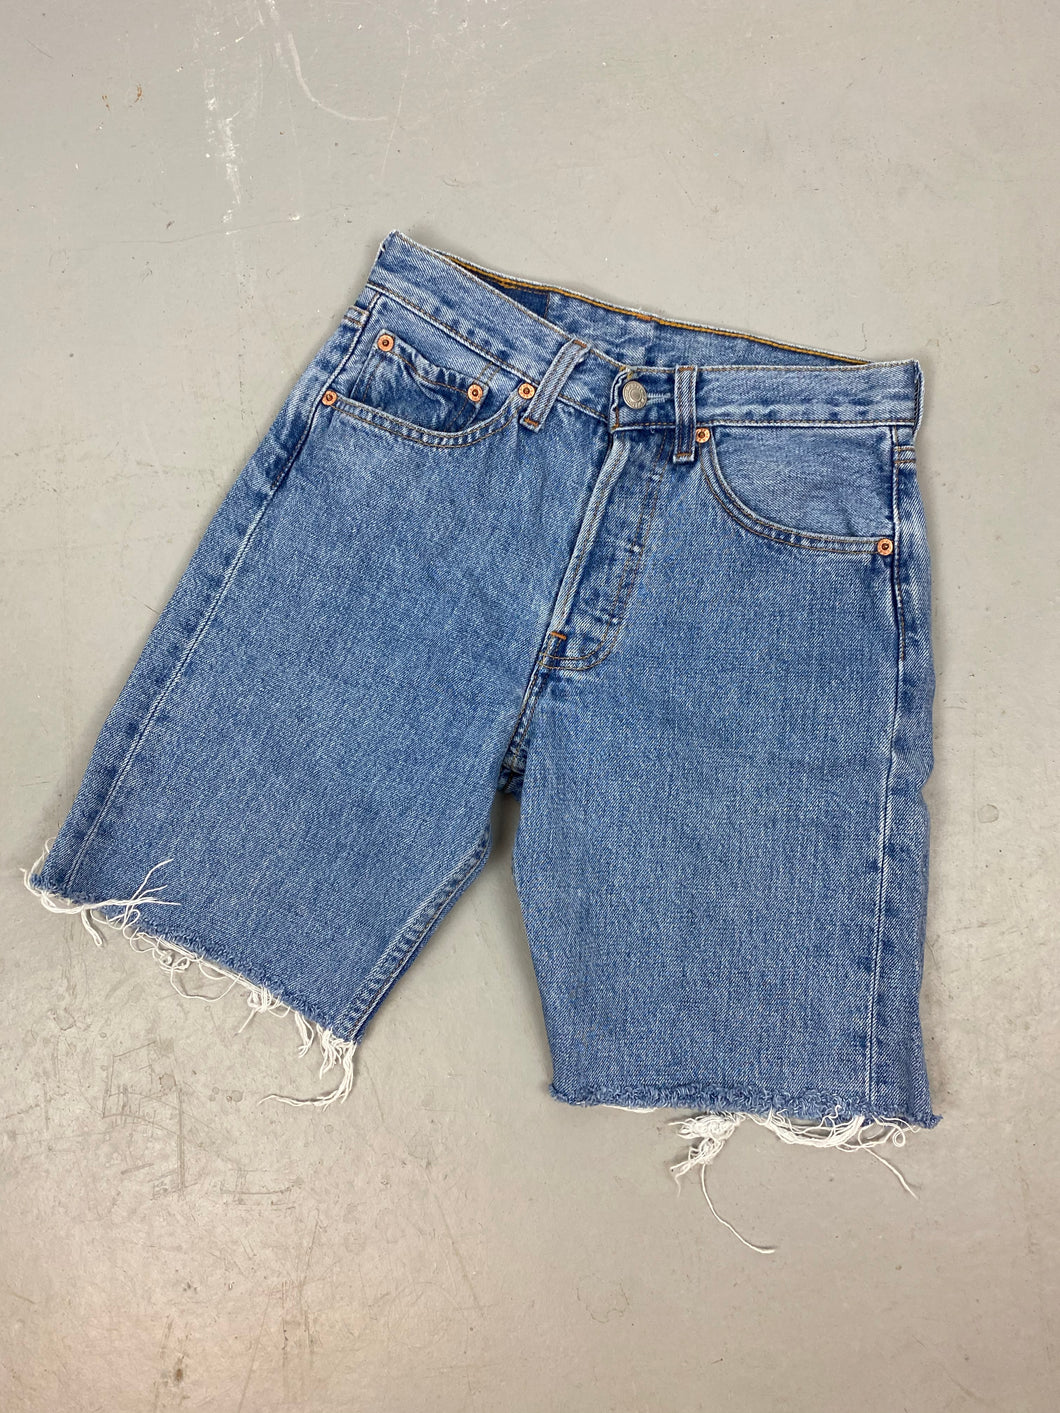 90s high waisted frayed Levi’s denim - 26in